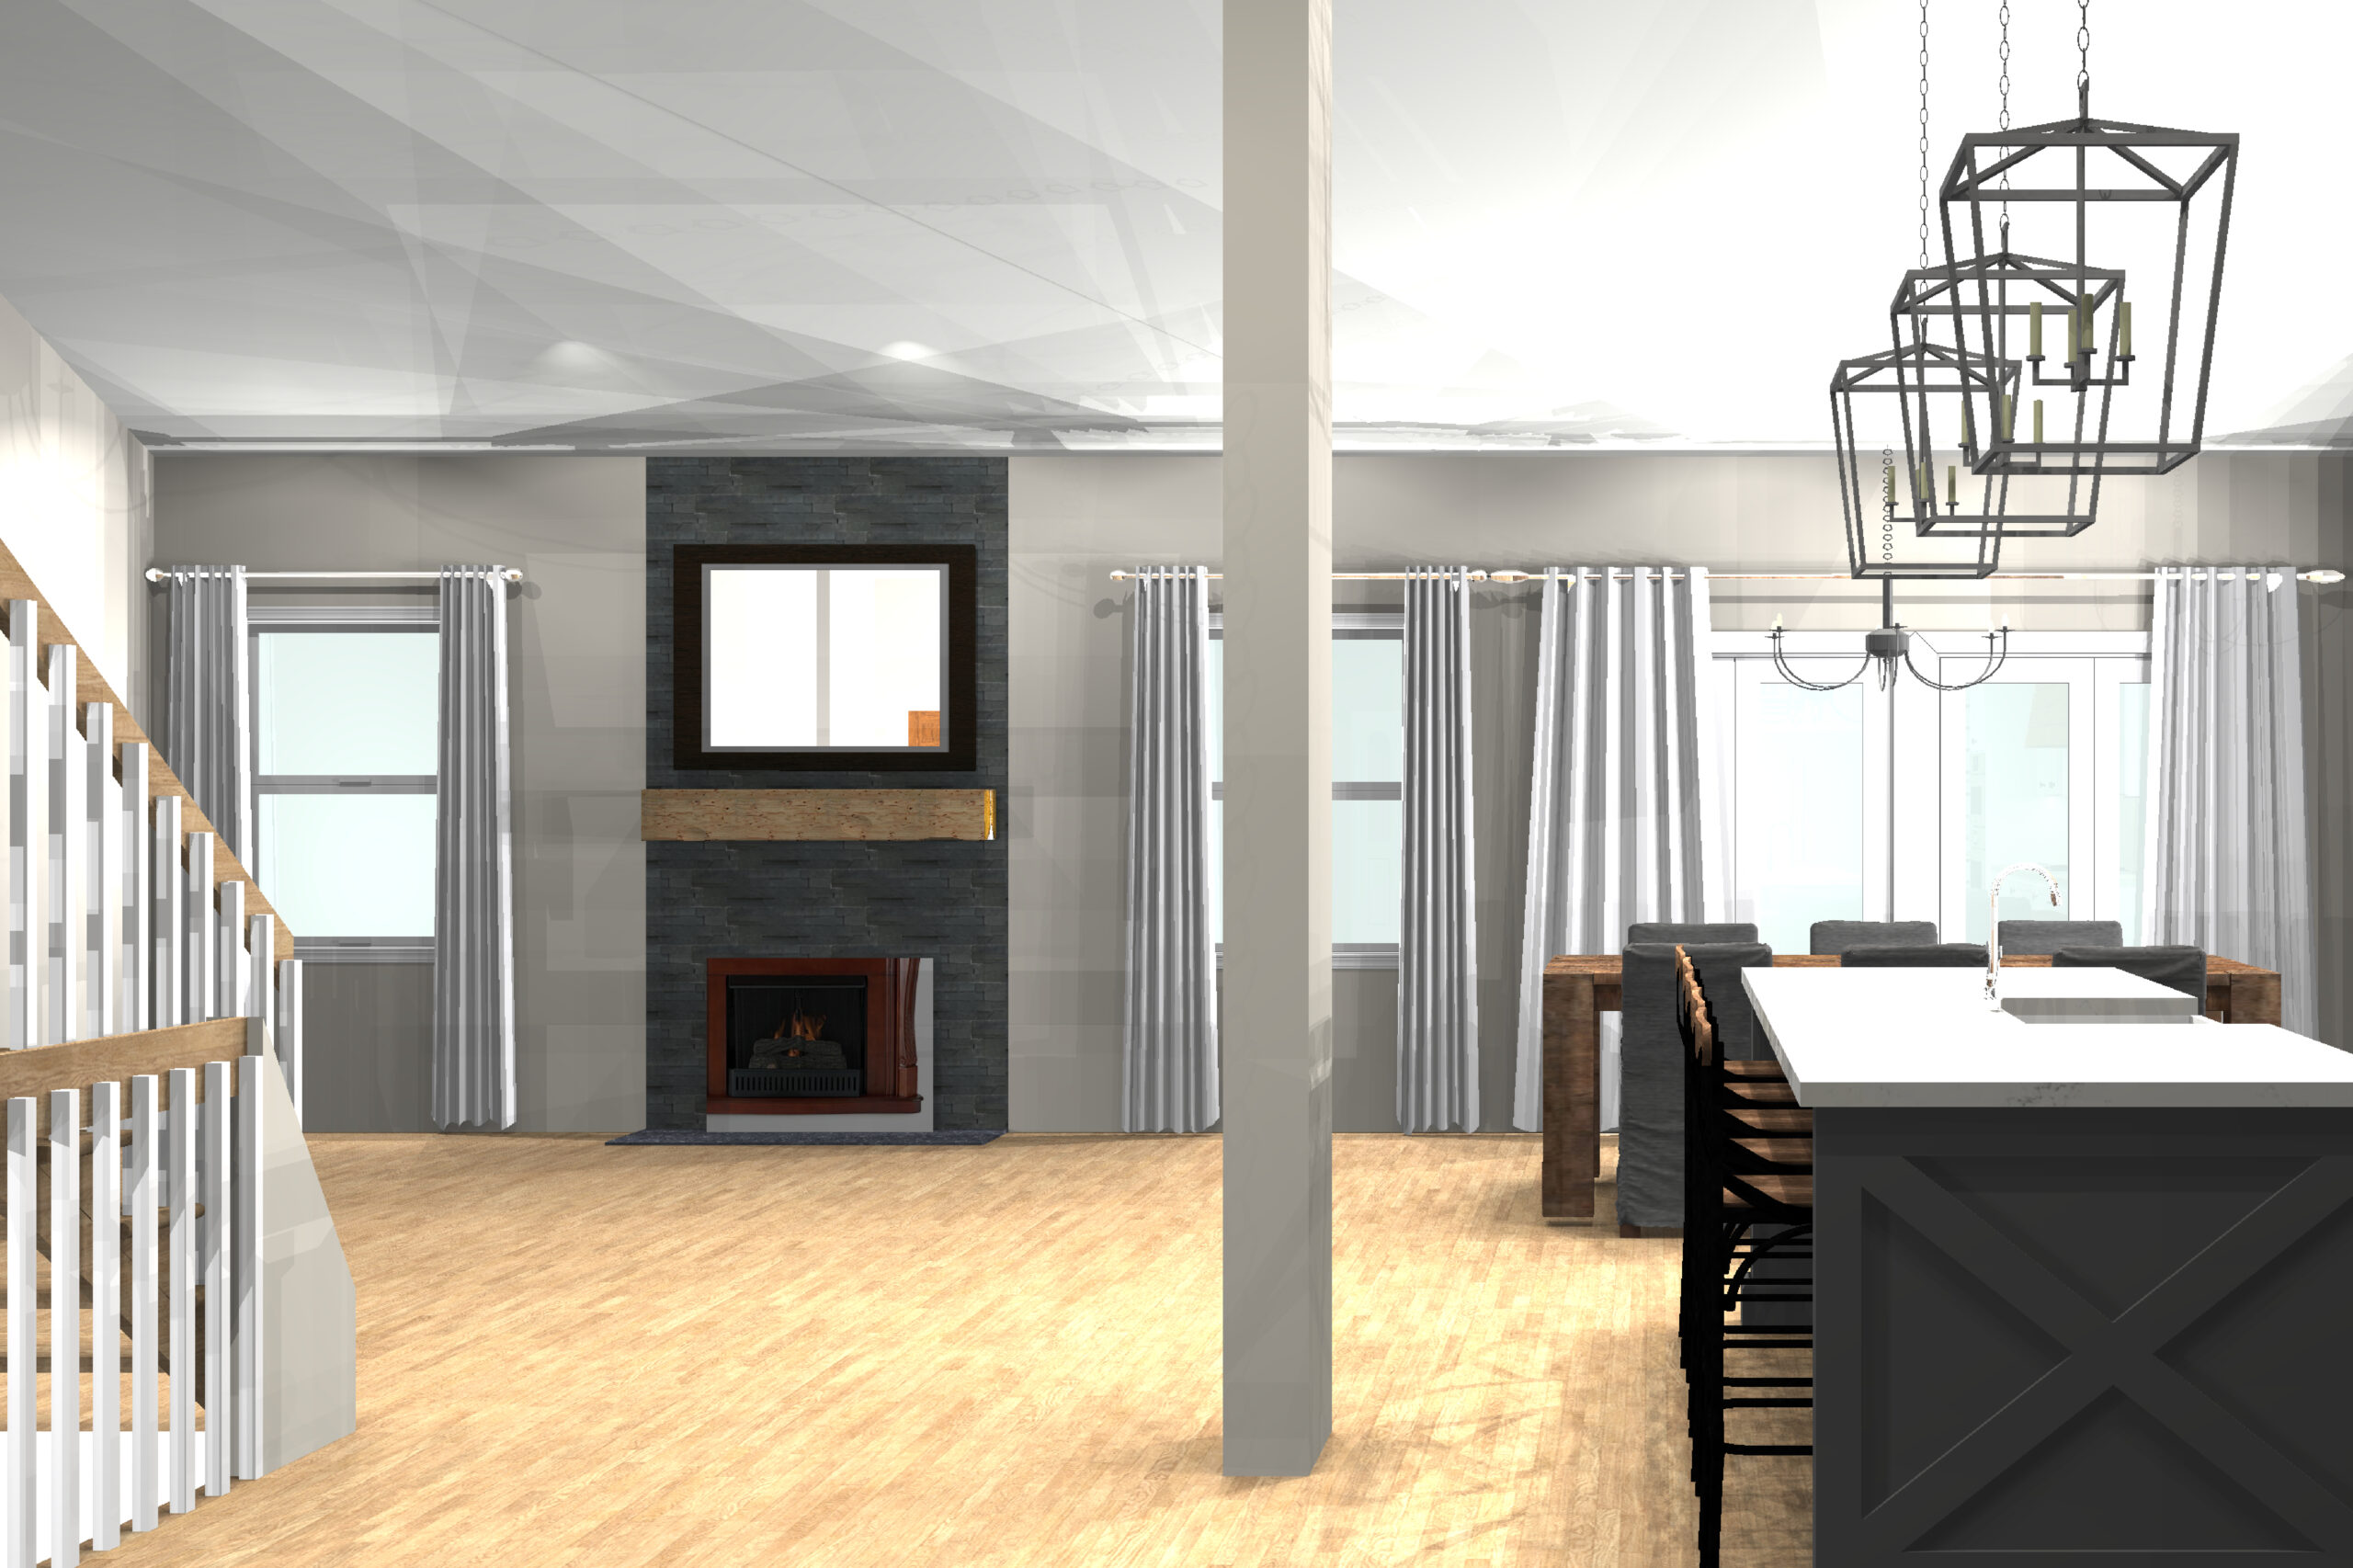 Frederick Fireplace rendering